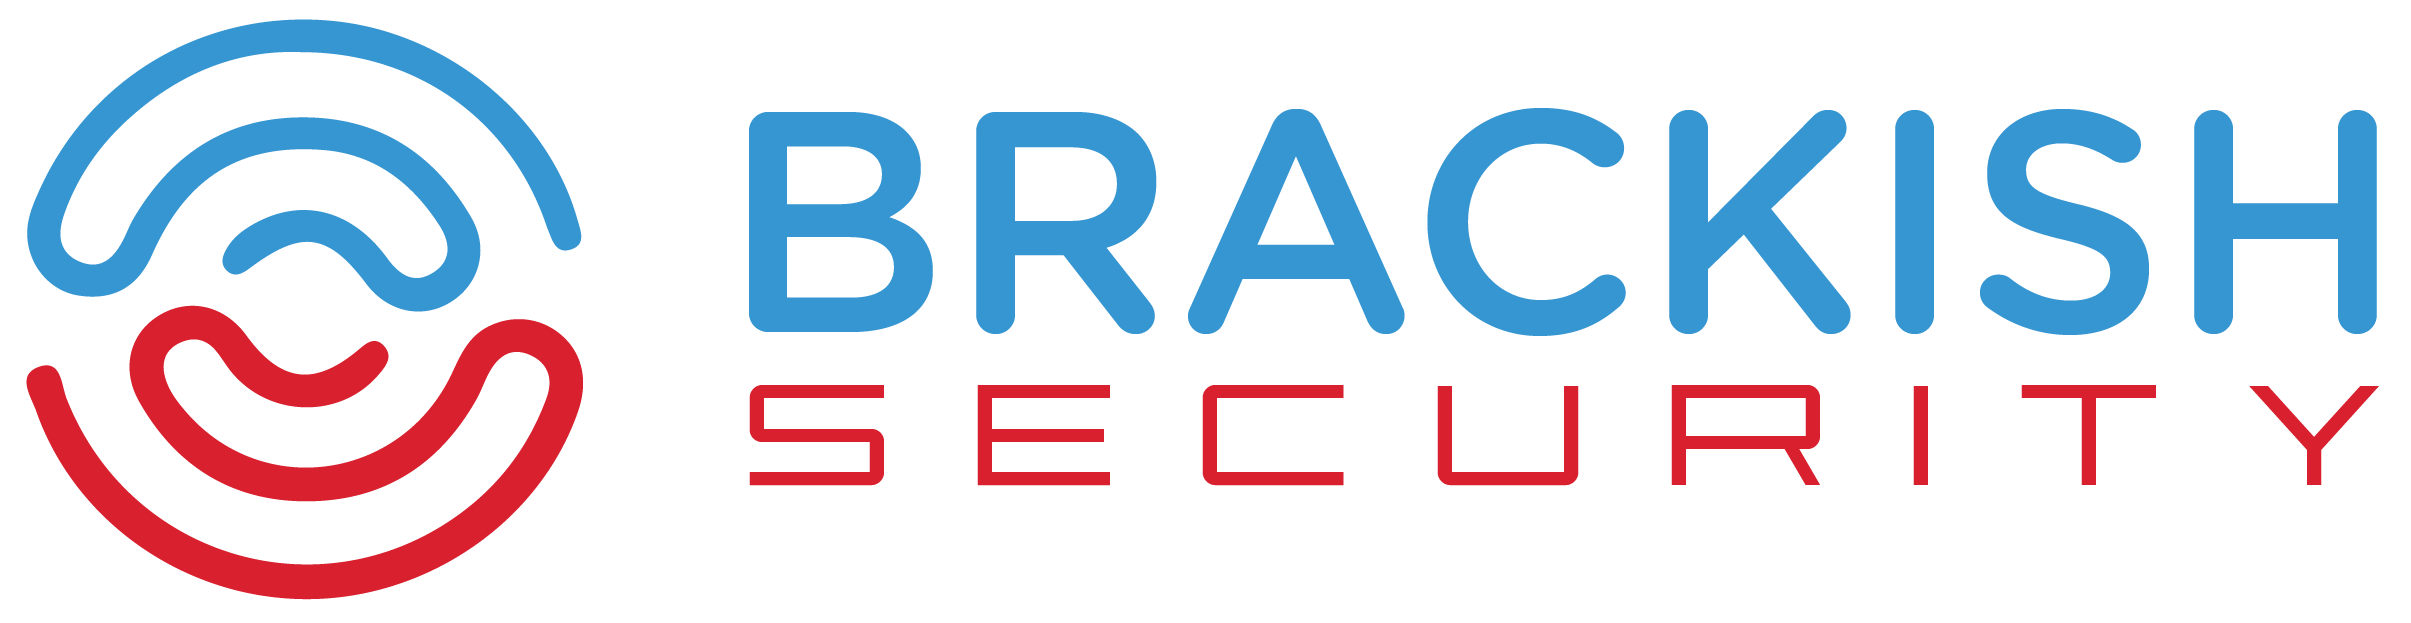 Welcome to Brackish Security!